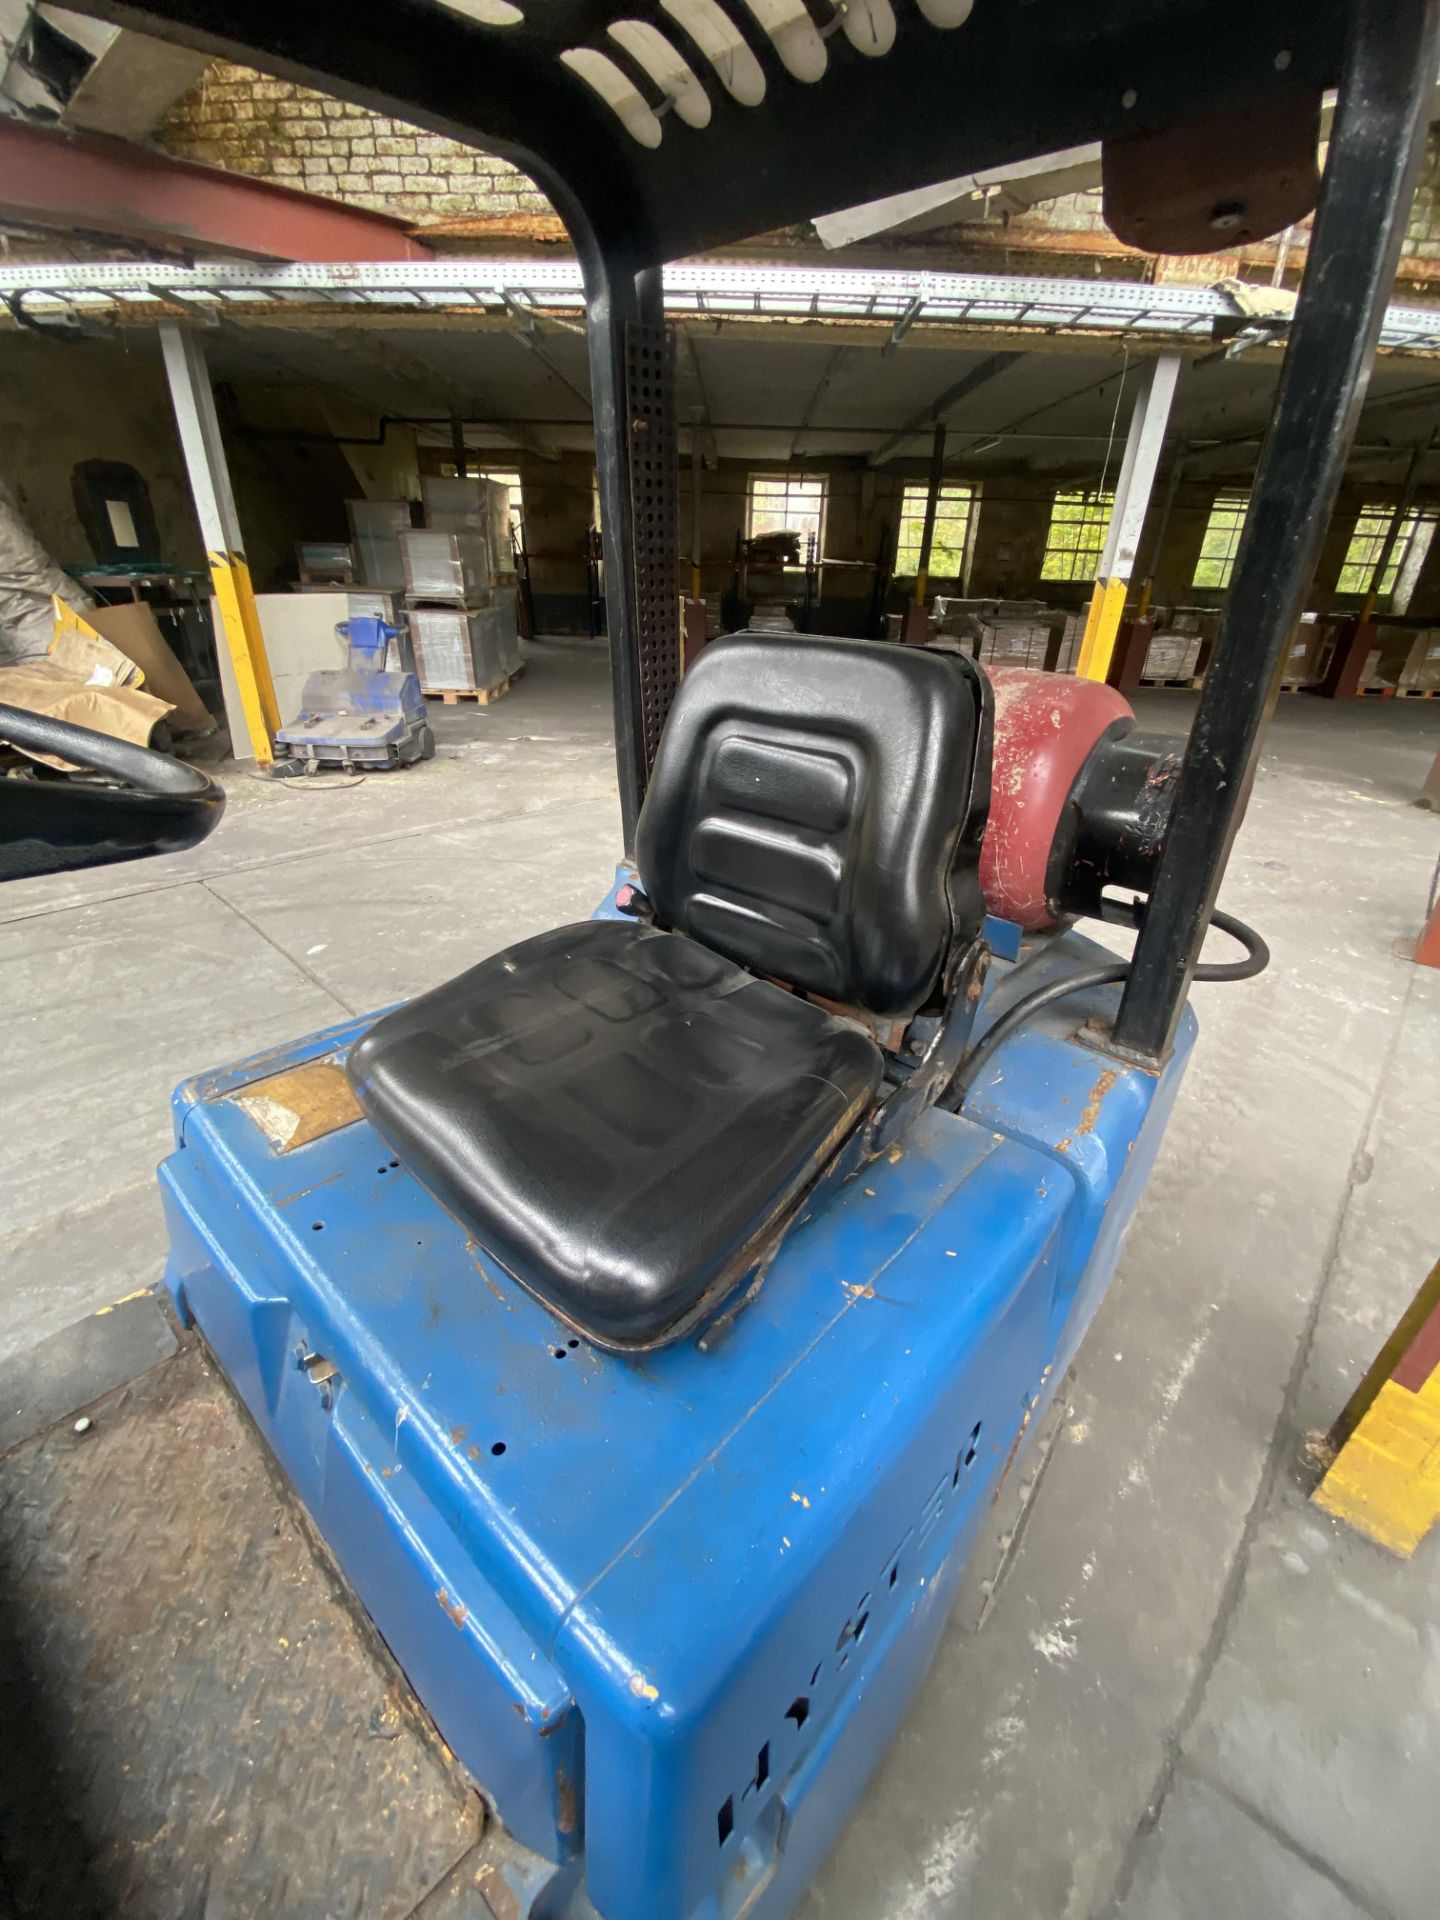 Hyster 50XL Vesta 1500kg cap. LPG Fork Lift Truck, serial no. C001B, indicated hours 2846.9 (at time - Image 8 of 11